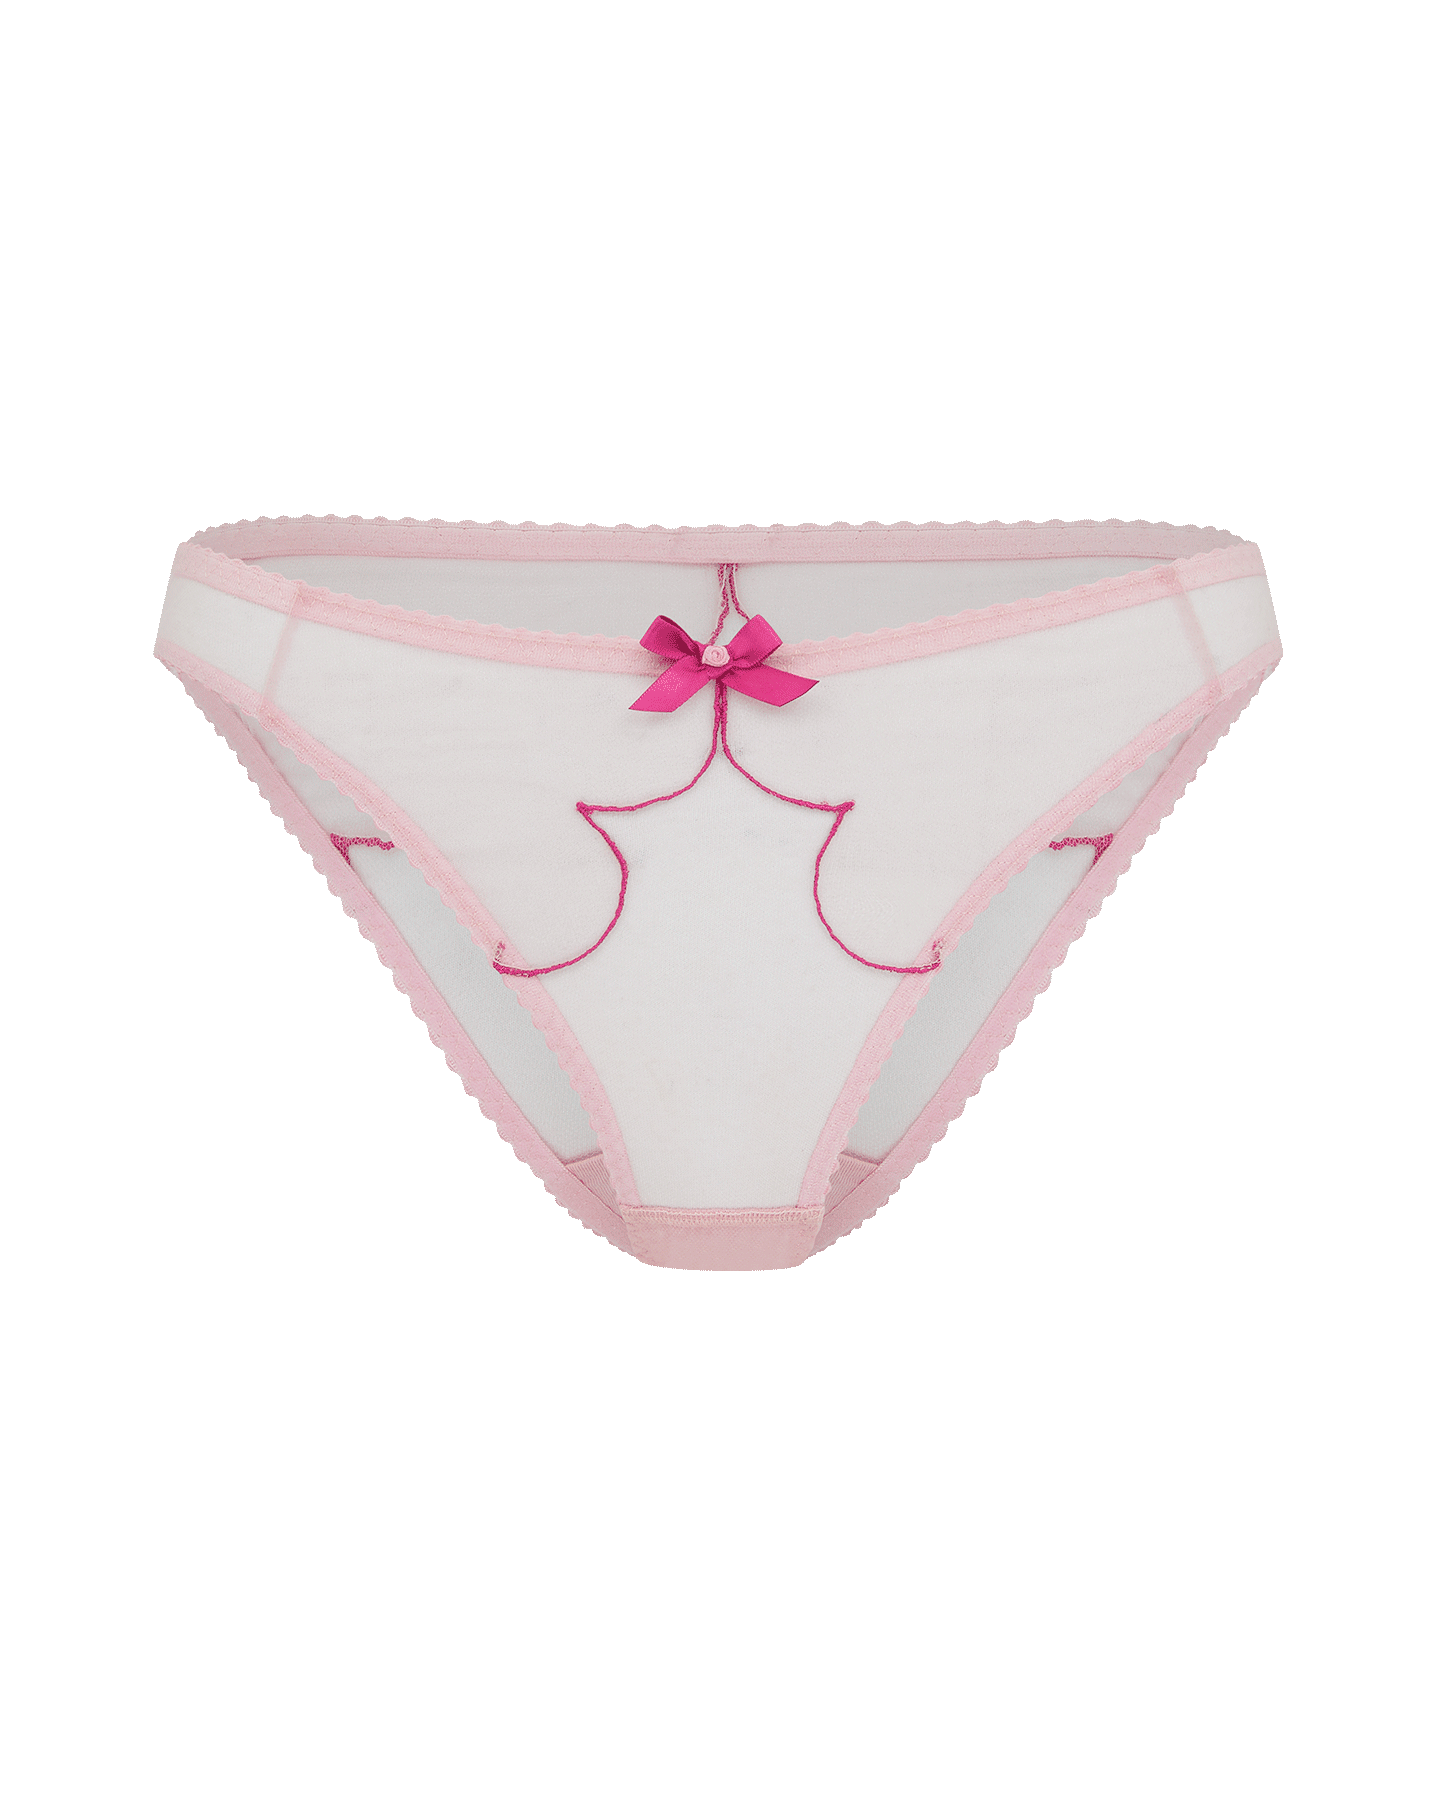 Lorna Full Brief in Baby Pink/Magenta | By Agent Provocateur